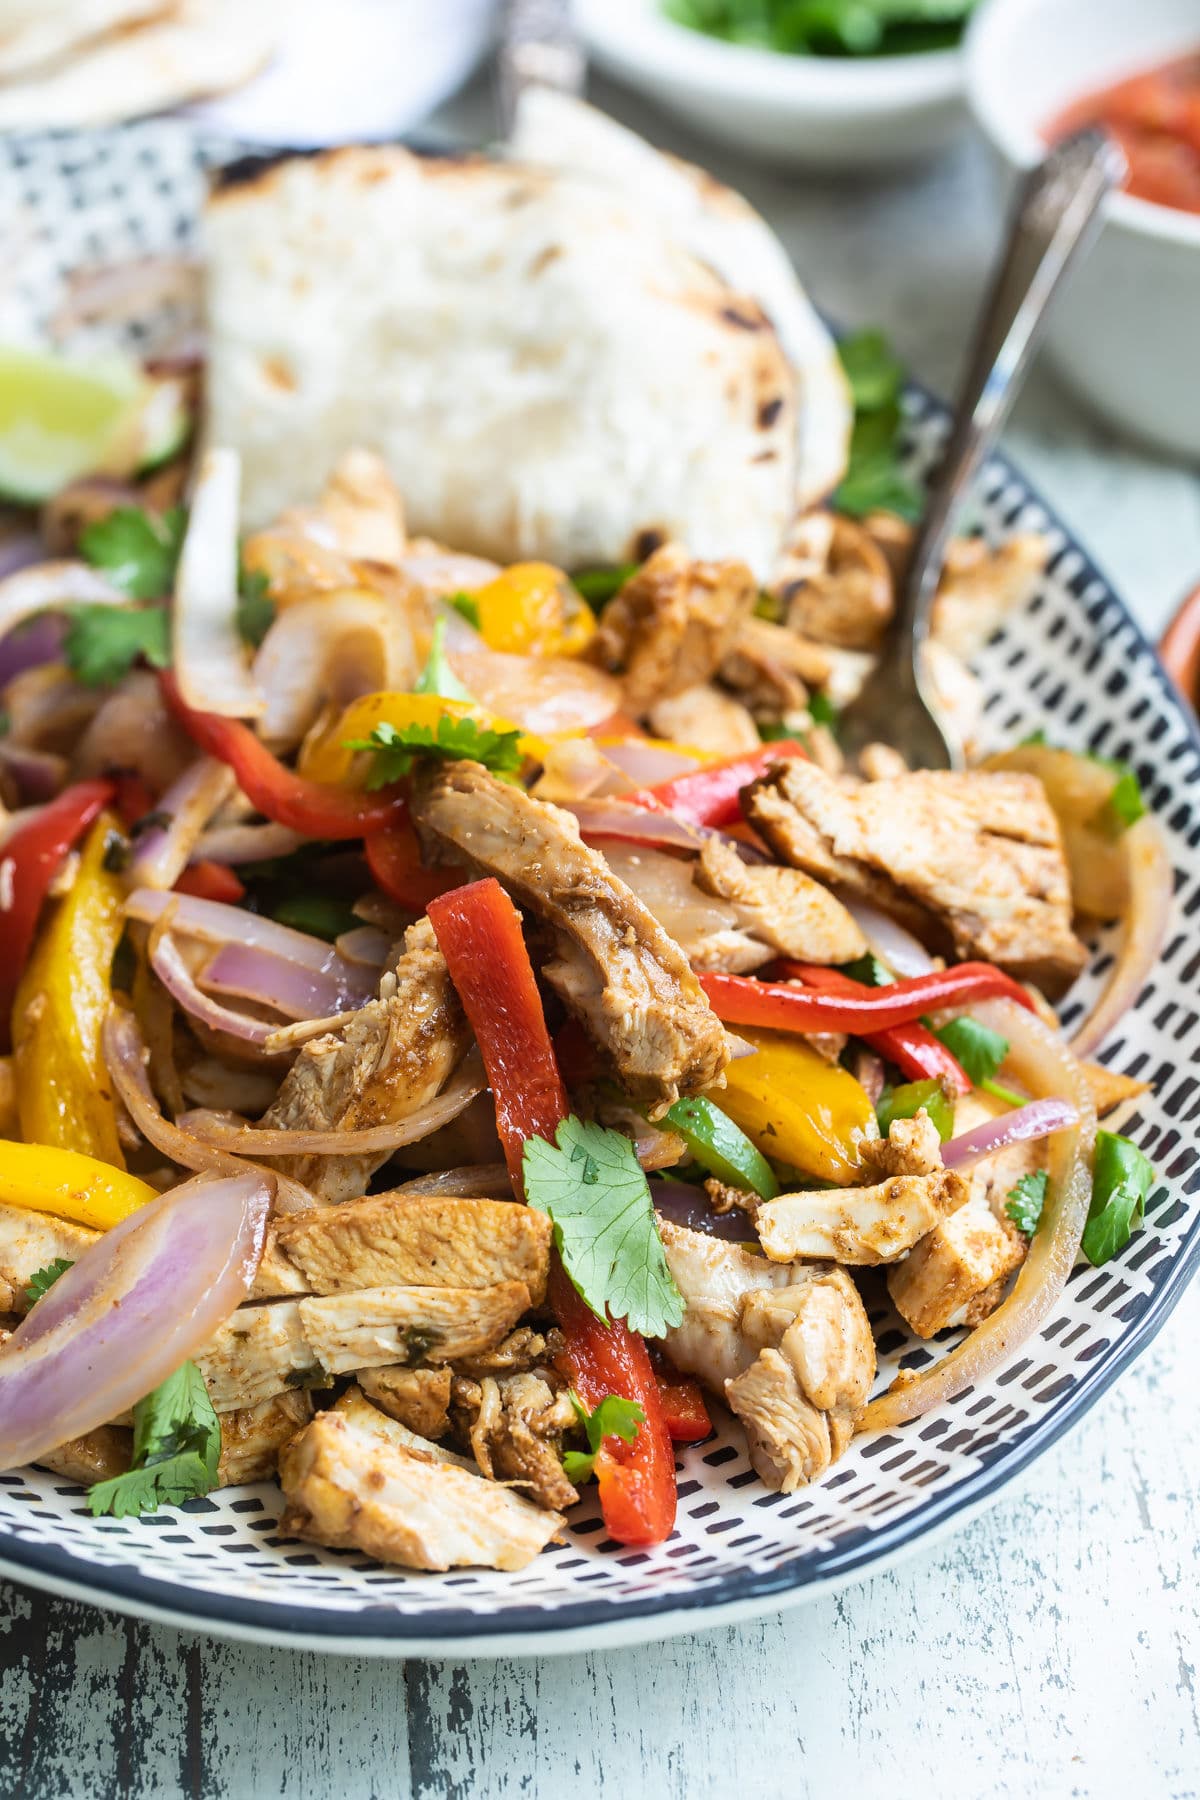 Chicken fajitas on a blue and white serving platter.